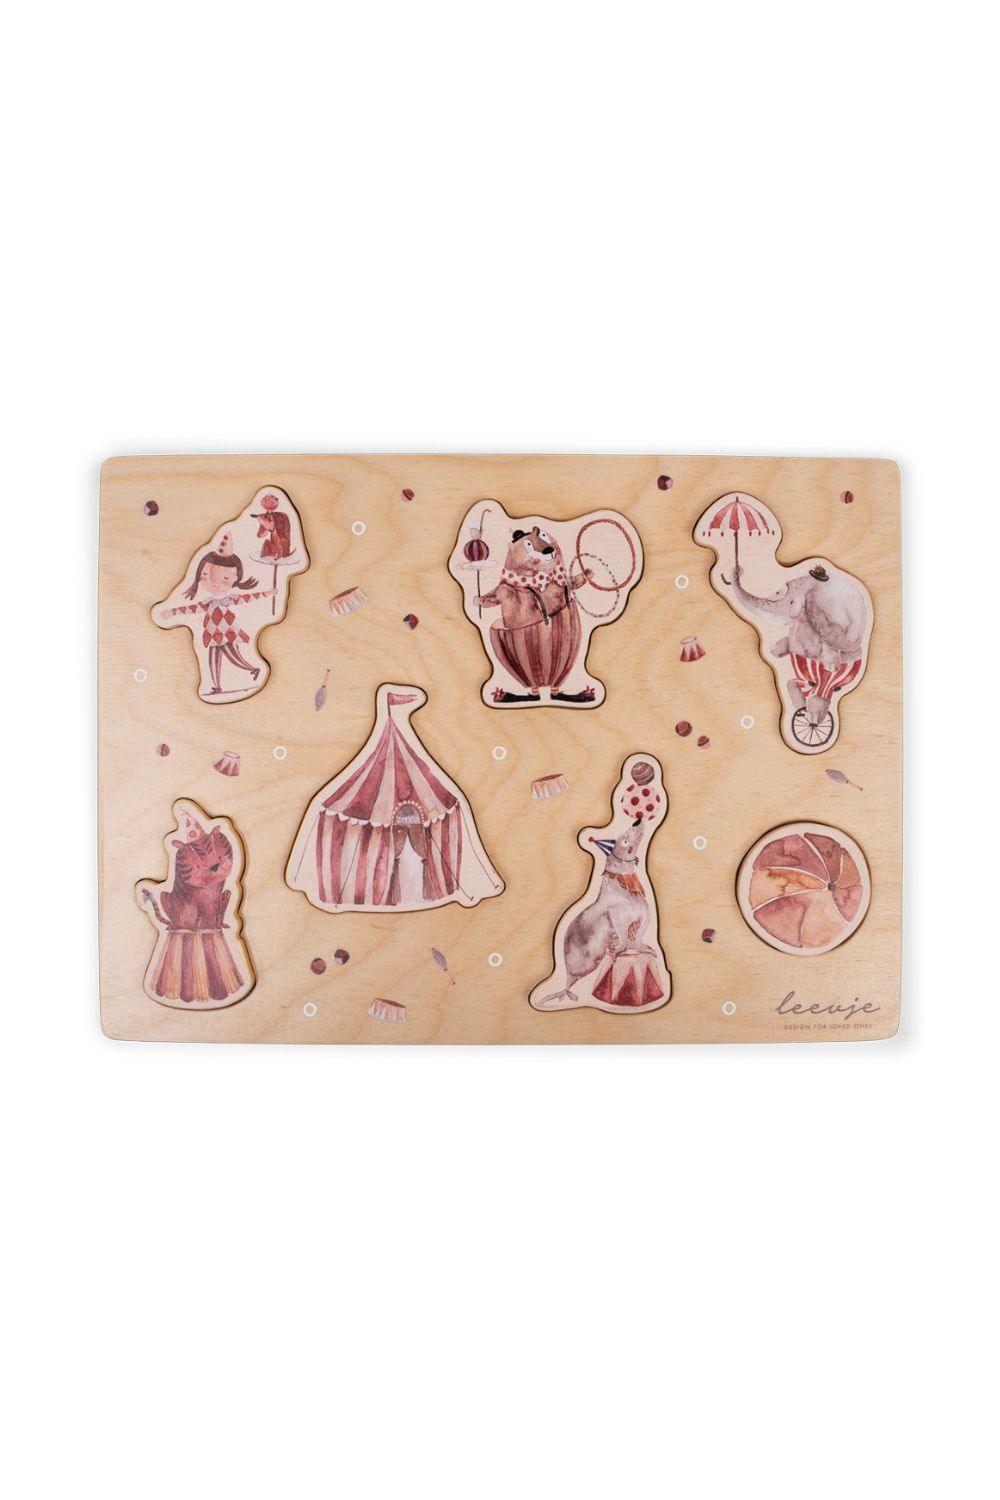 3D Puzzle 'Circus' - The Little One • Family.Concept.Store. 